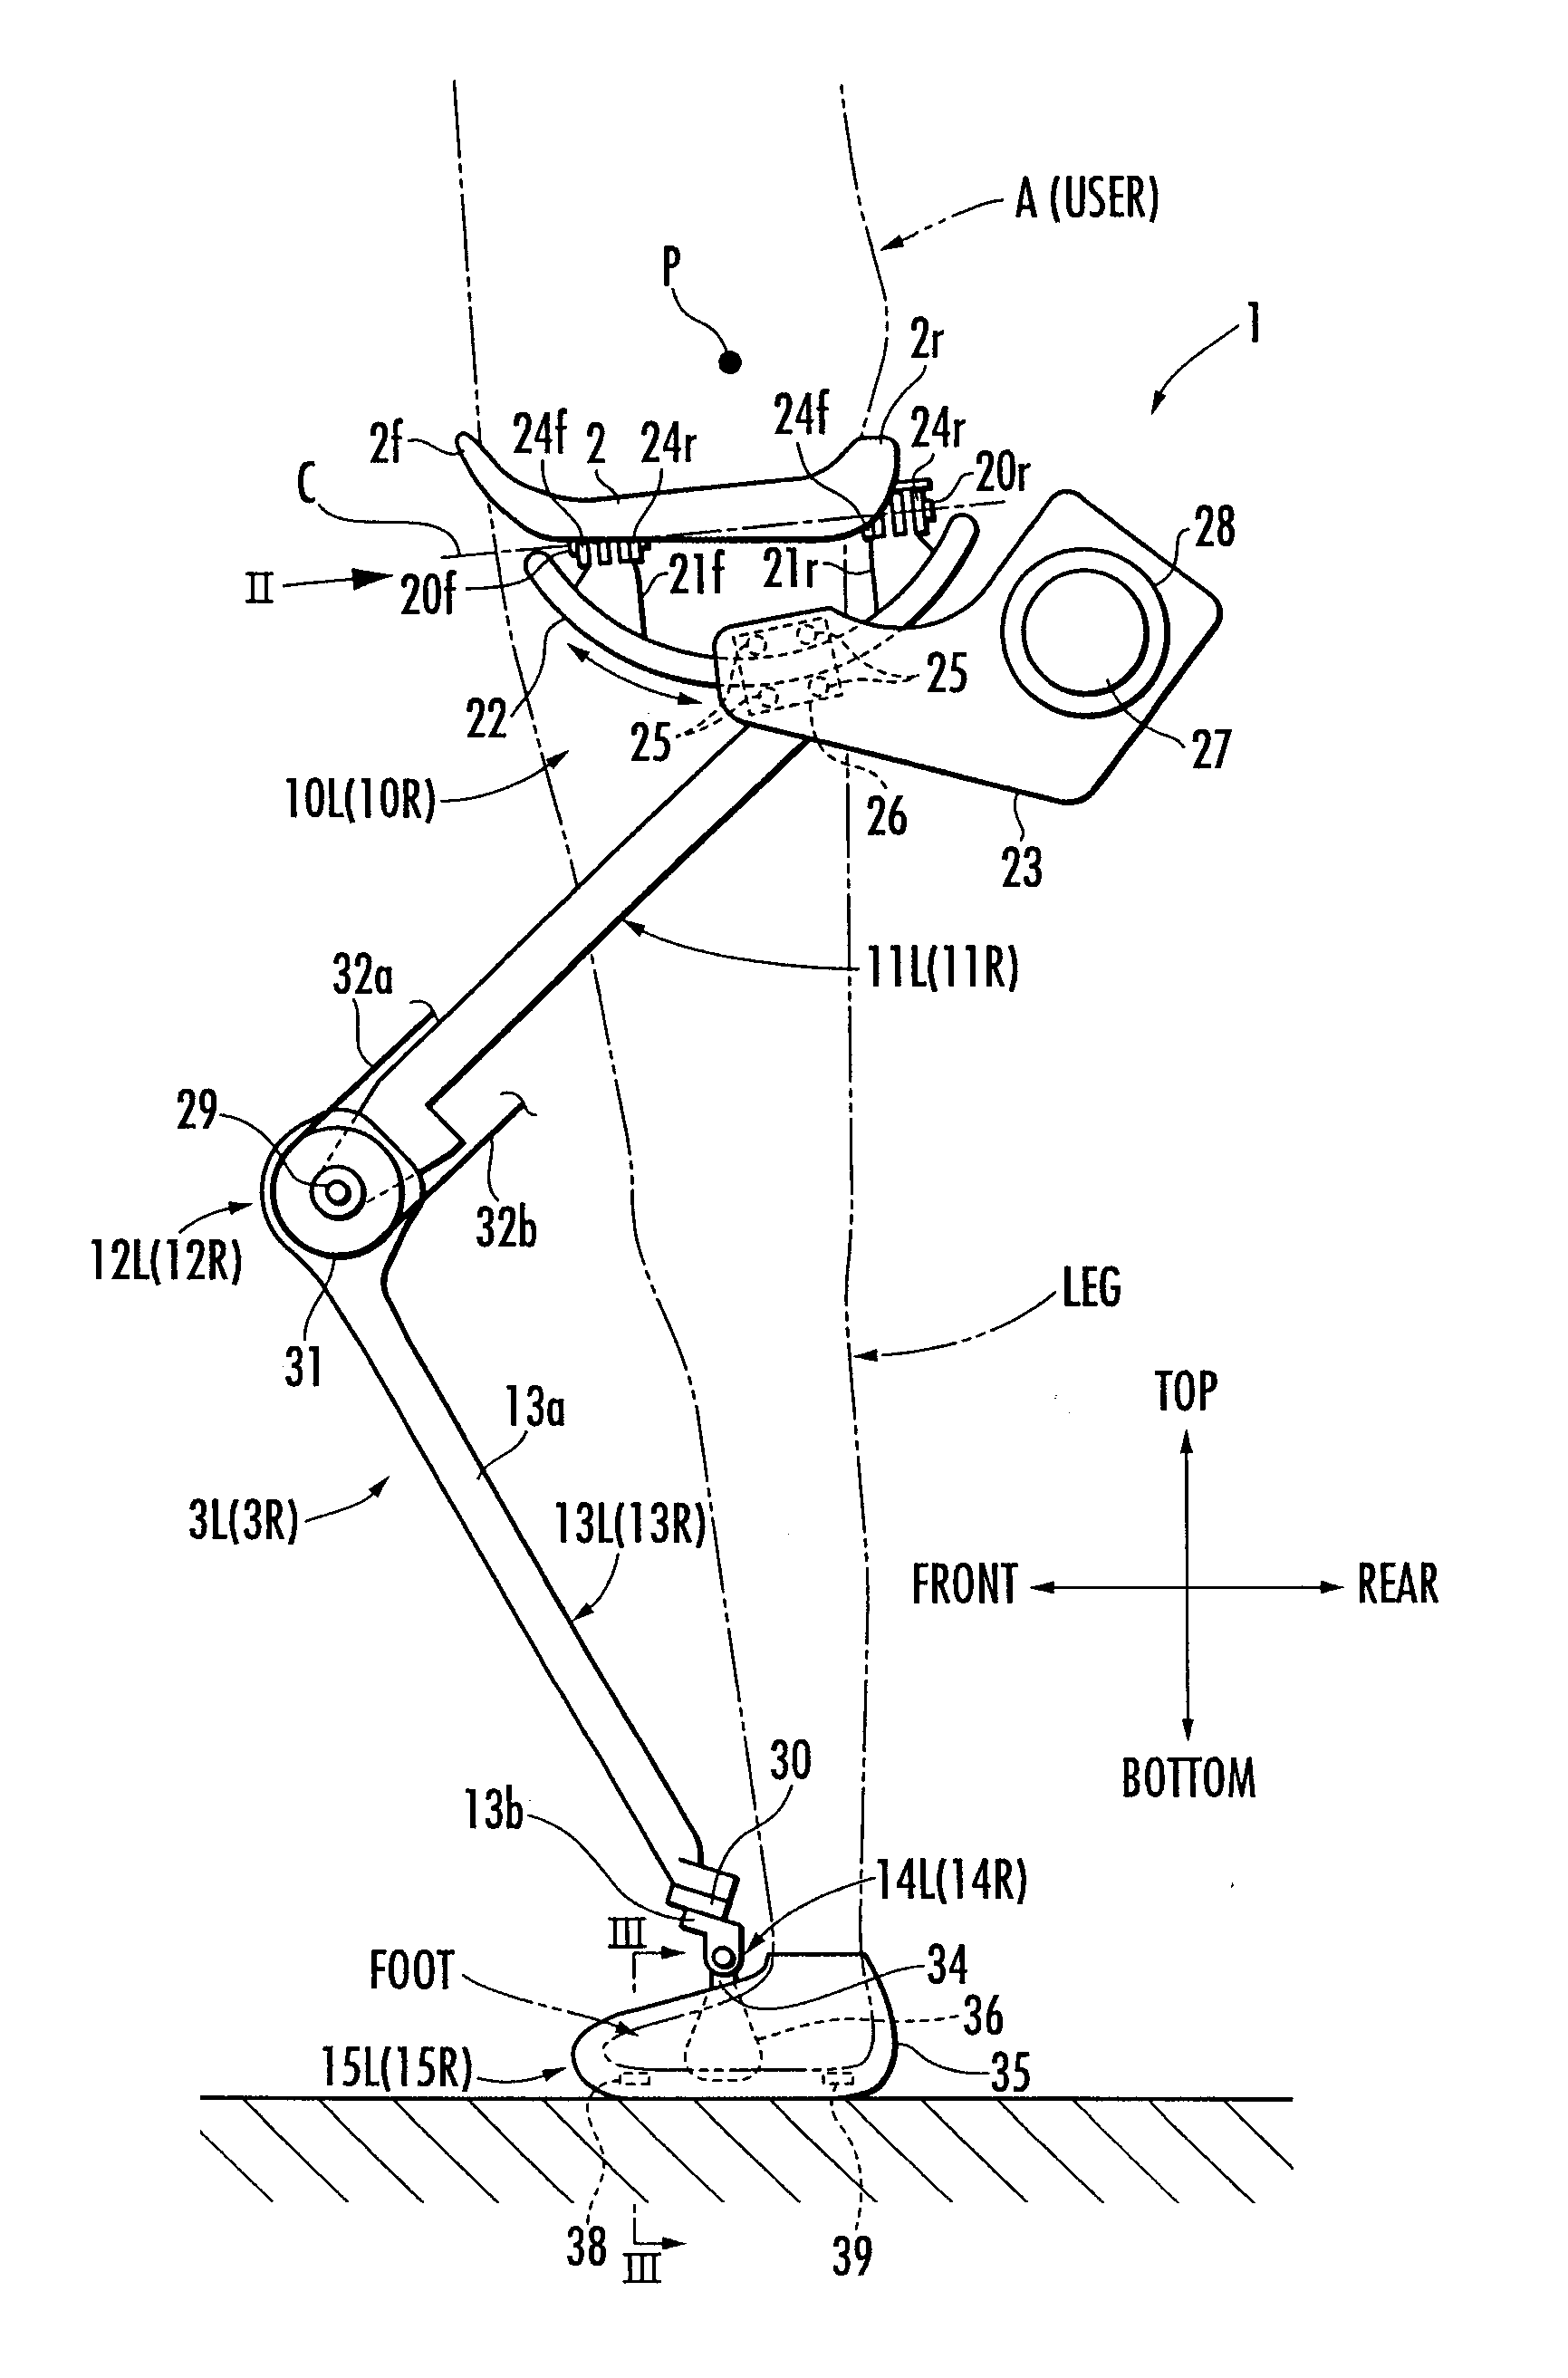 Control device and control program for walking assist apparatus